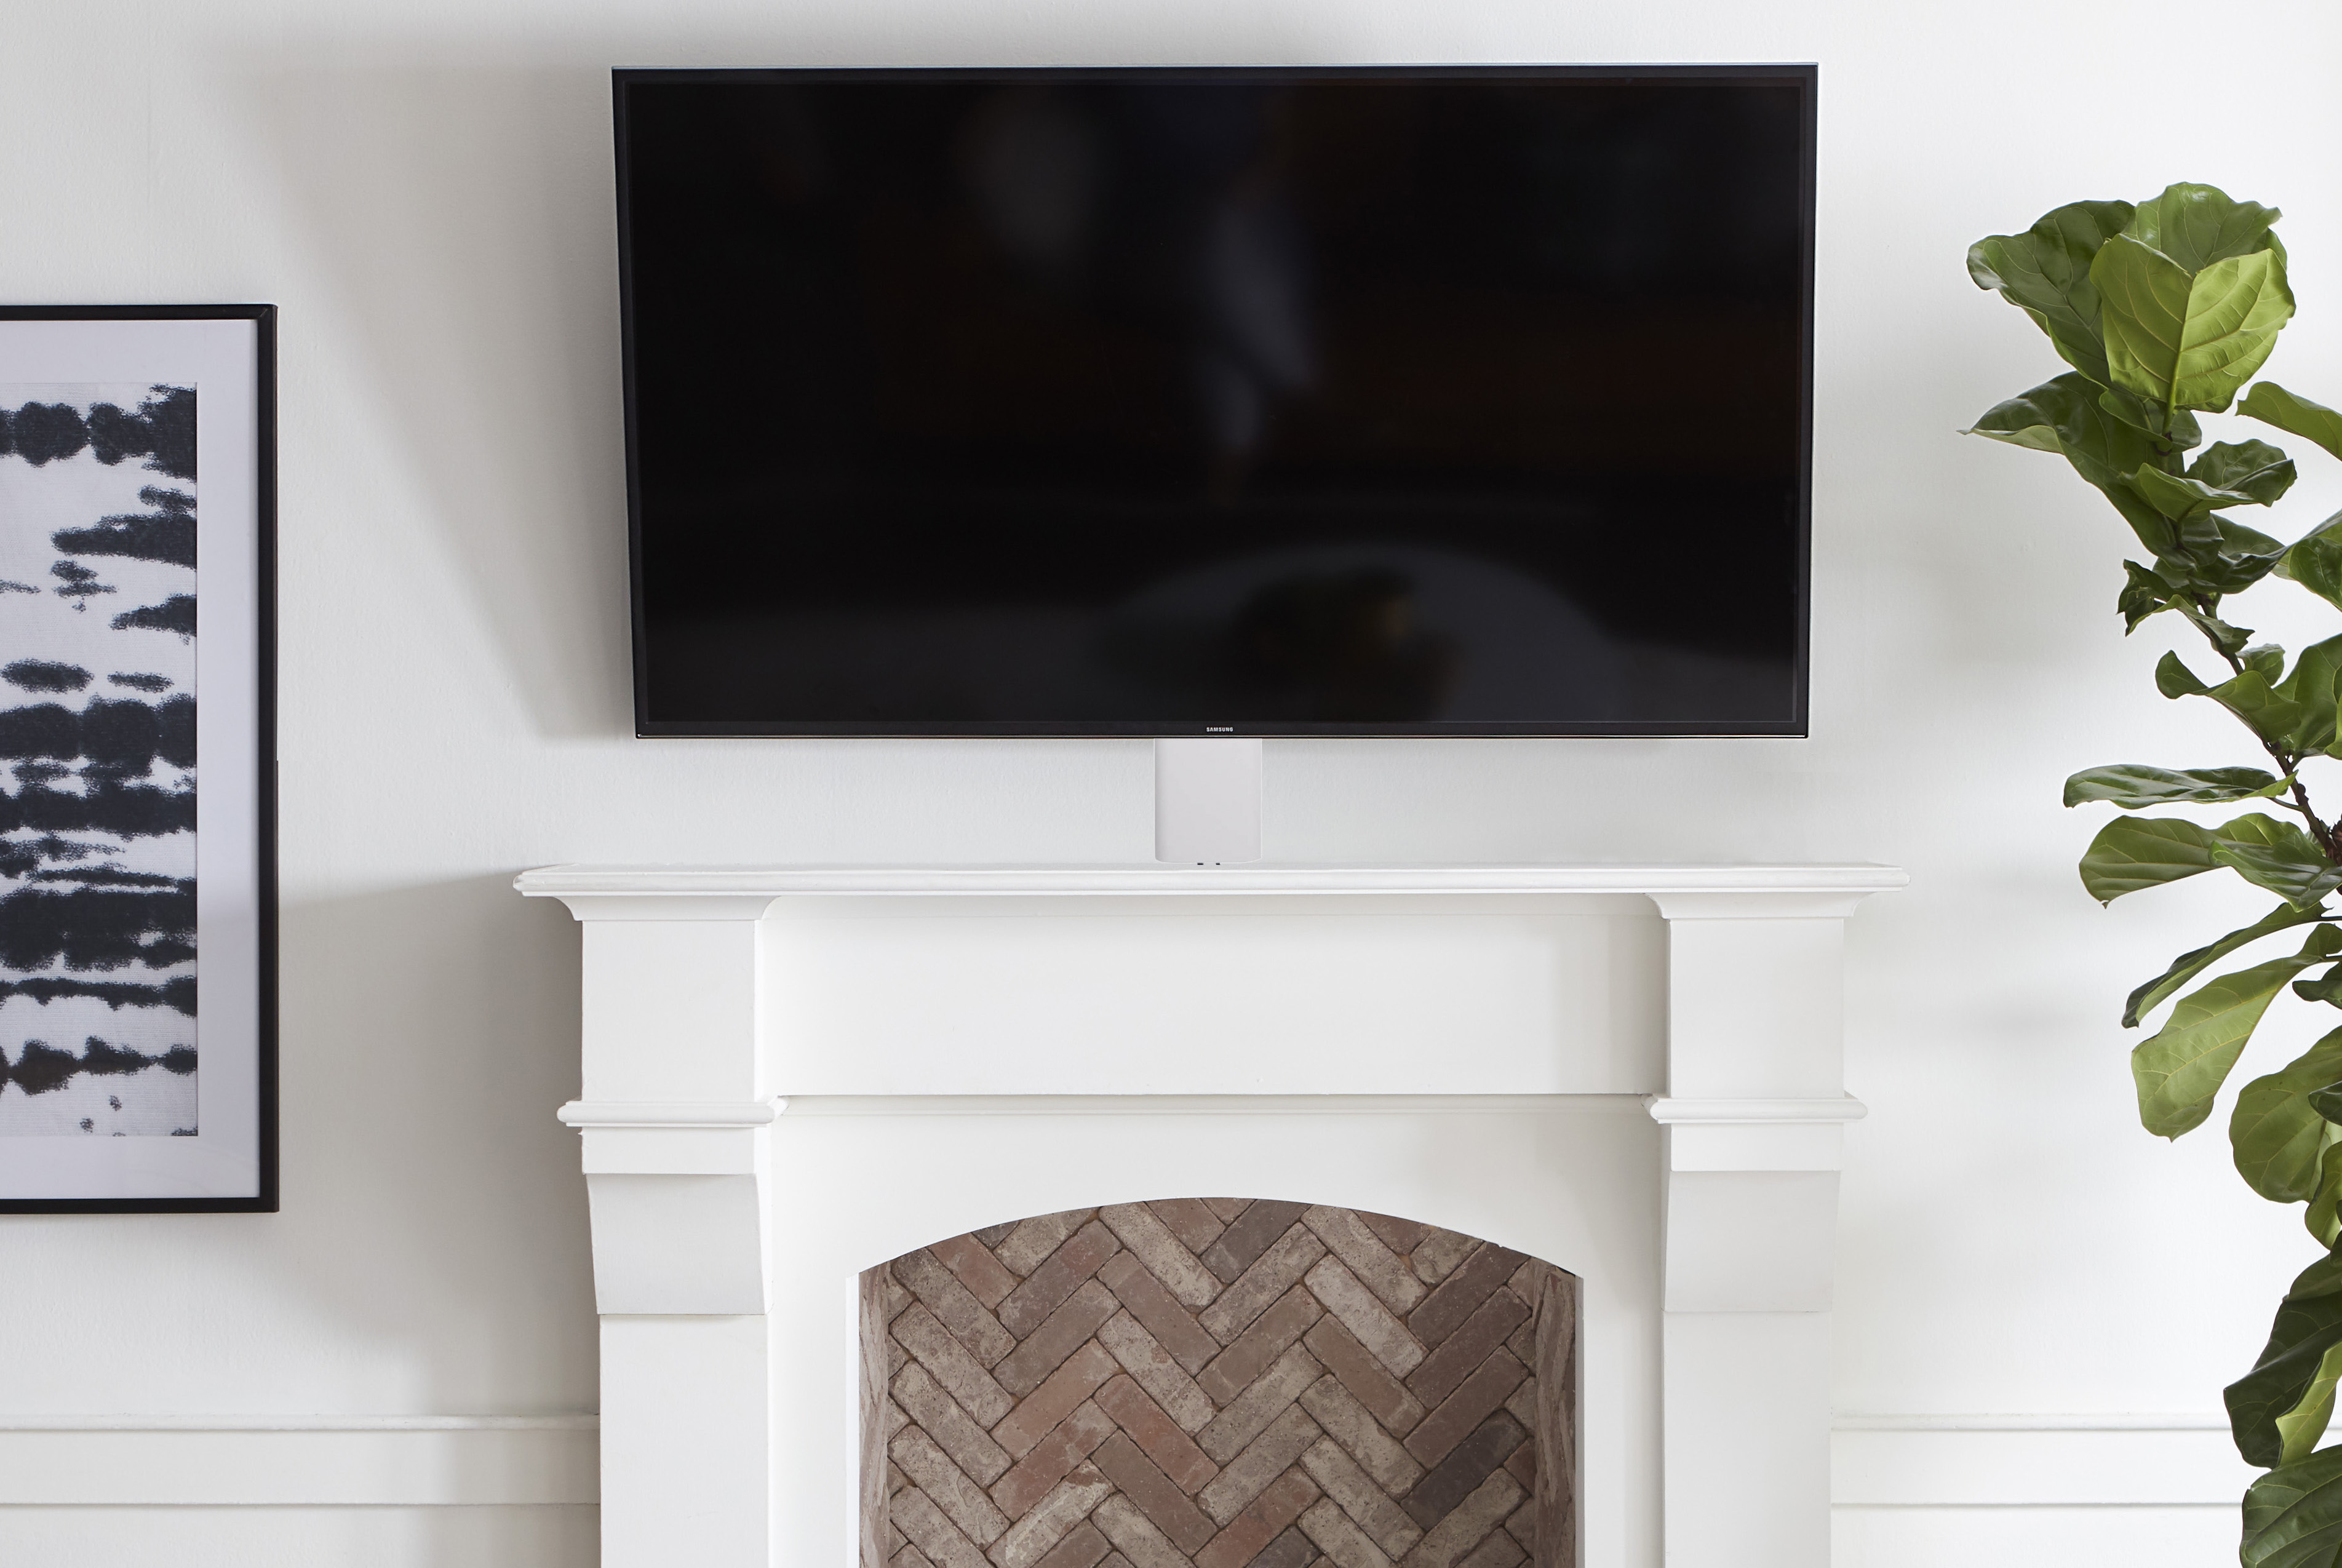 Mounting A Tv Over Fireplace How, How To Put A Tv Above Fireplace With Cable Box